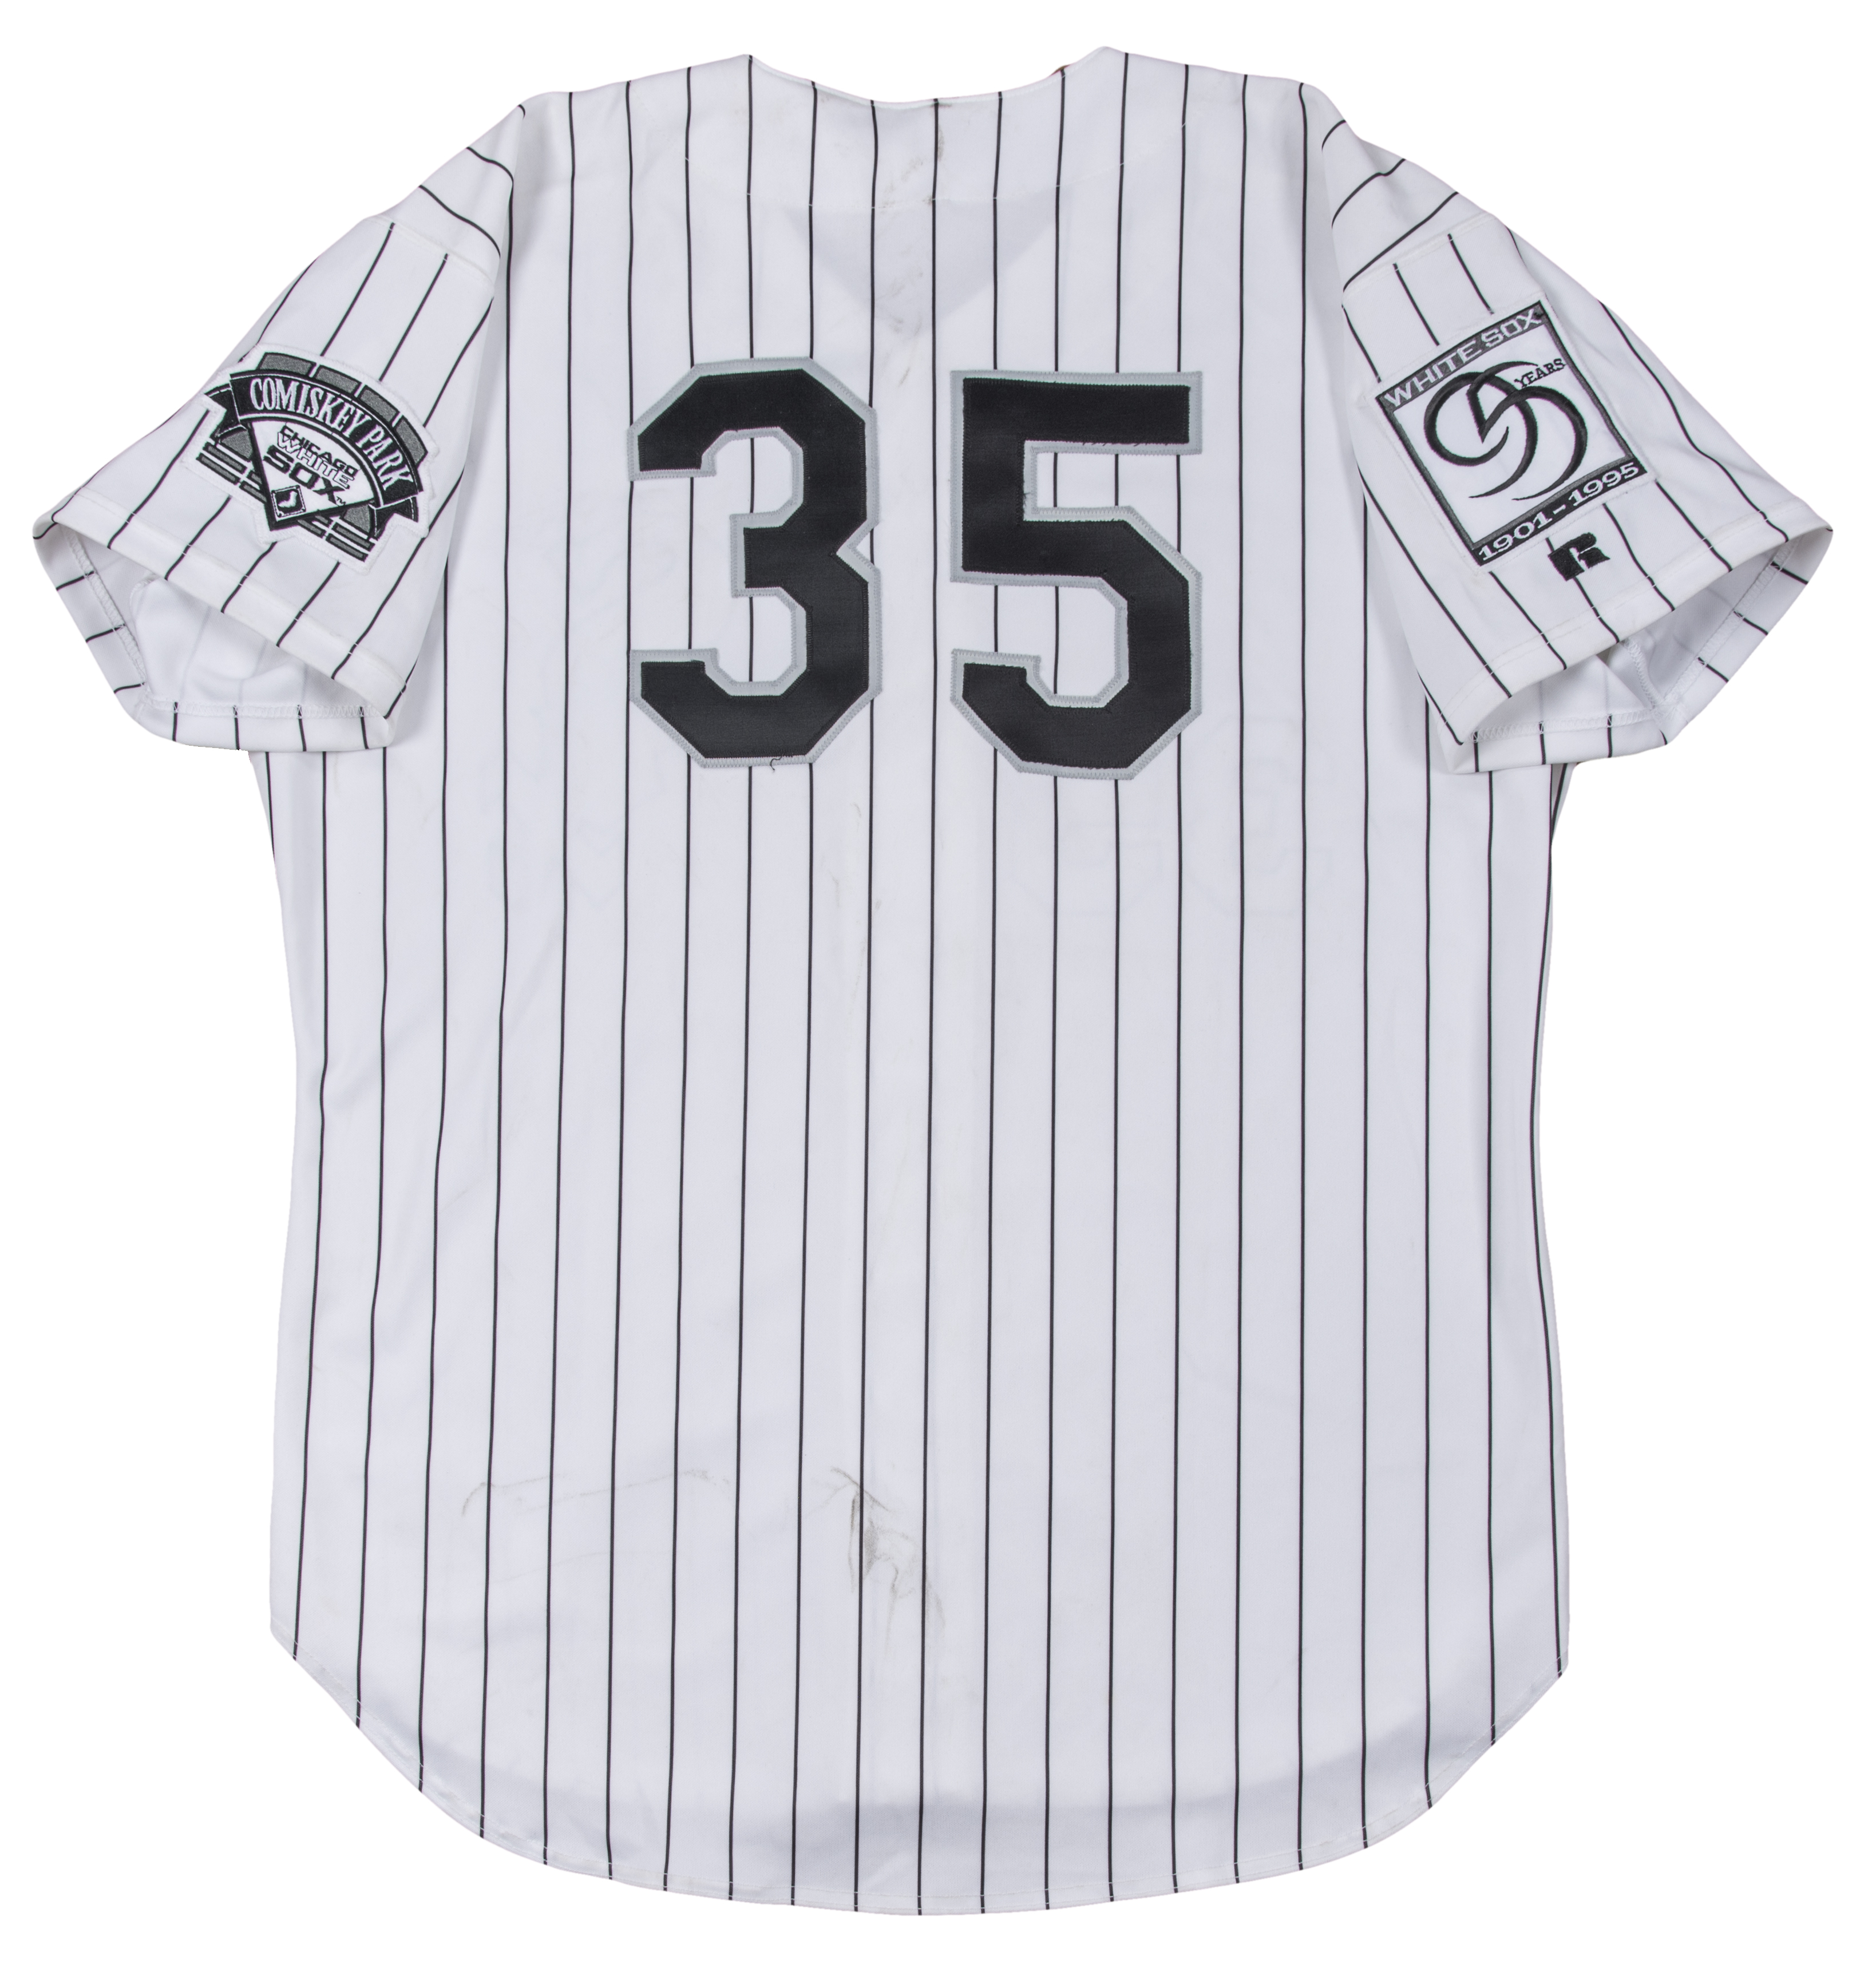 1995 Frank Thomas Chicago White Sox road Jersey